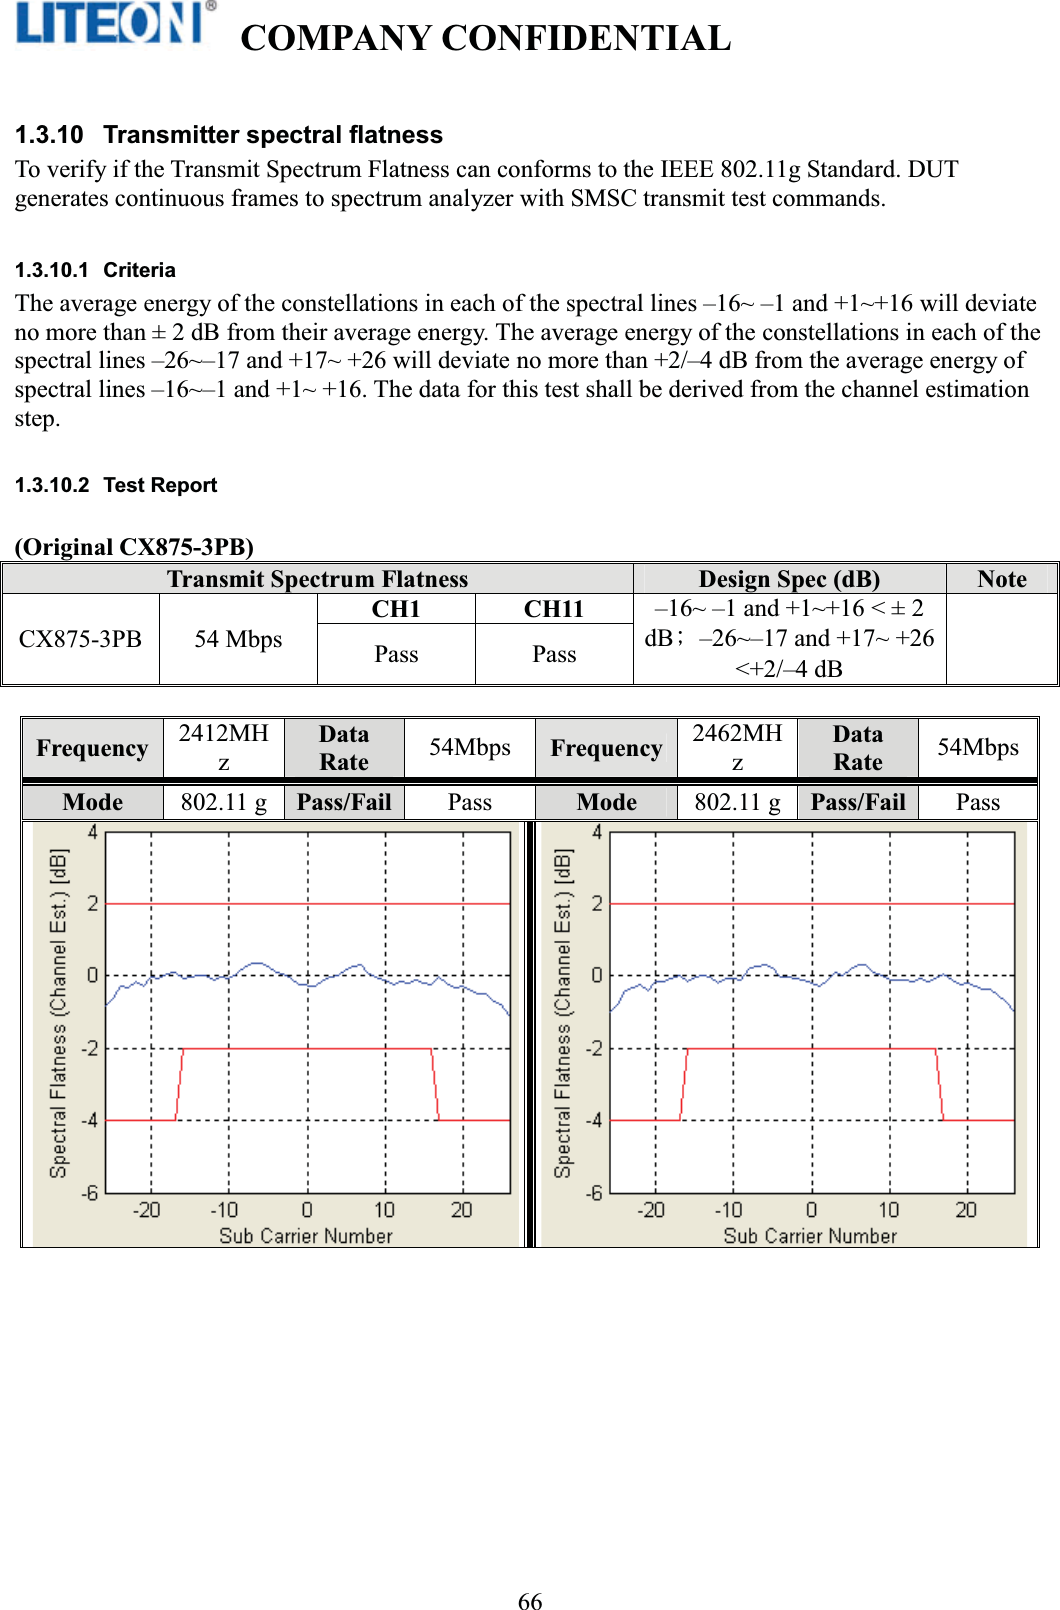   COMPANY CONFIDENTIAL   !661.3.10  Transmitter spectral flatness To verify if the Transmit Spectrum Flatness can conforms to the IEEE 802.11g Standard. DUT generates continuous frames to spectrum analyzer with SMSC transmit test commands. 1.3.10.1 Criteria The average energy of the constellations in each of the spectral lines –16~ –1 and +1~+16 will deviate no more than ± 2 dB from their average energy. The average energy of the constellations in each of the spectral lines –26~–17 and +17~ +26 will deviate no more than +2/–4 dB from the average energy of spectral lines –16~–1 and +1~ +16. The data for this test shall be derived from the channel estimation step. 1.3.10.2 Test Report (Original CX875-3PB) Transmit Spectrum Flatness  Design Spec (dB)  Note CX875-3PB 54 MbpsCH1 CH11 –16~ –1 and +1~+16 &lt; ± 2 dBΙ  –26~–17 and +17~ +26 &lt;+2/–4 dBPass Pass Frequency 2412MHz Data Rate  54Mbps  Frequency 2462MHz Data Rate  54MbpsMode  802.11 g Pass/Fail Pass  Mode 802.11 g Pass/Fail Pass 